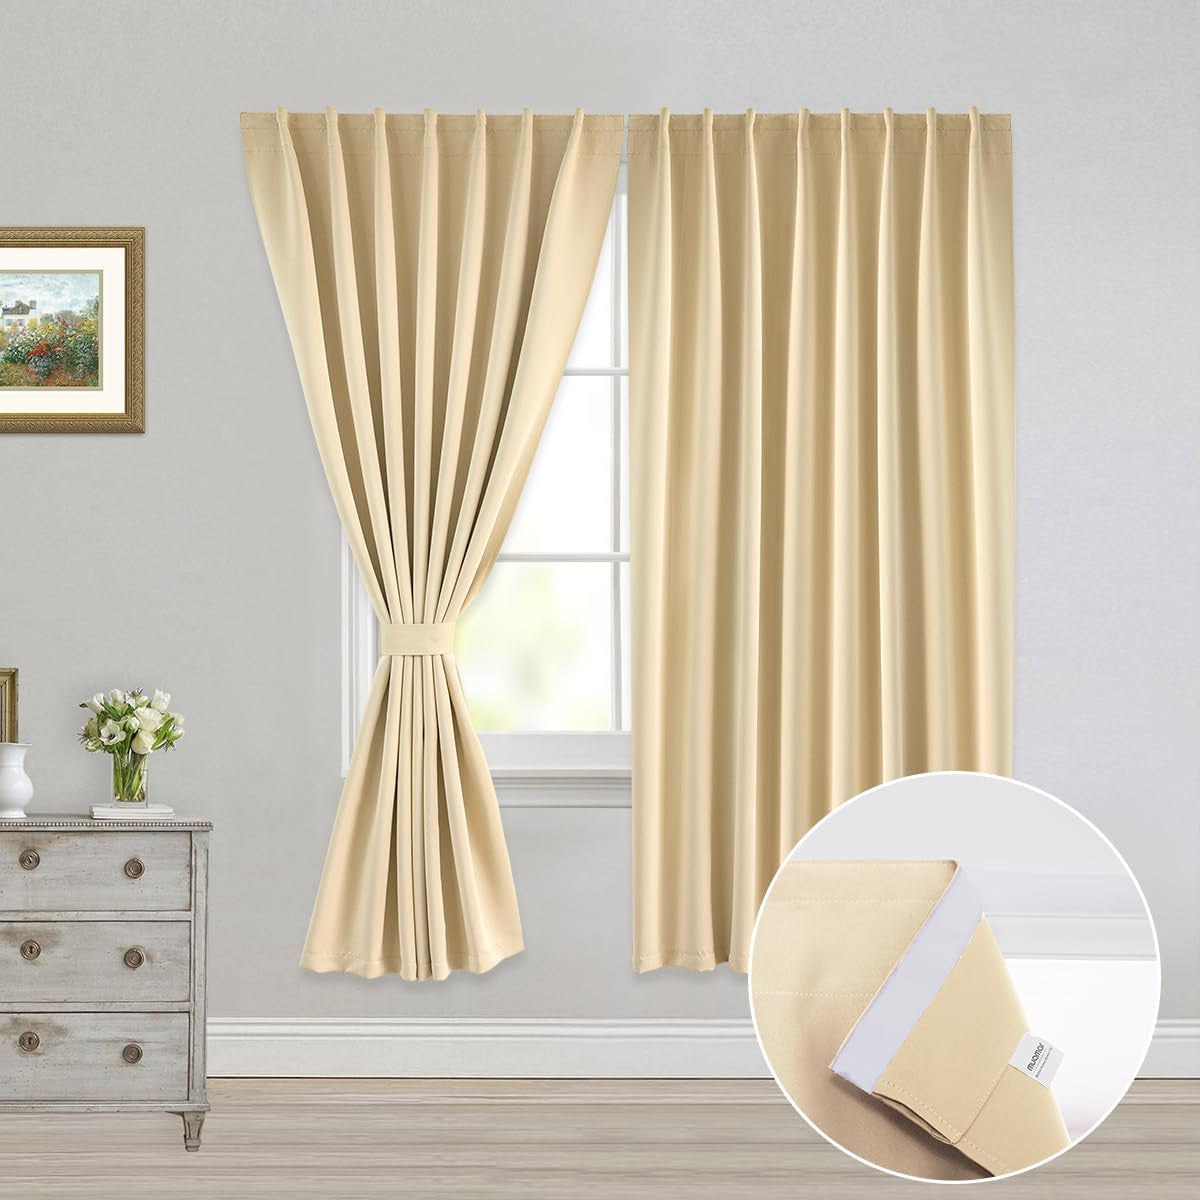 Muamar 2Pcs Blackout Curtains Privacy Curtains 63 Inch Length Window Curtains,Easy Install Thermal Insulated Window Shades,Stick Curtains No Rods, Black 42" W X 63" L  Muamar Beige 52"W X 63"L 